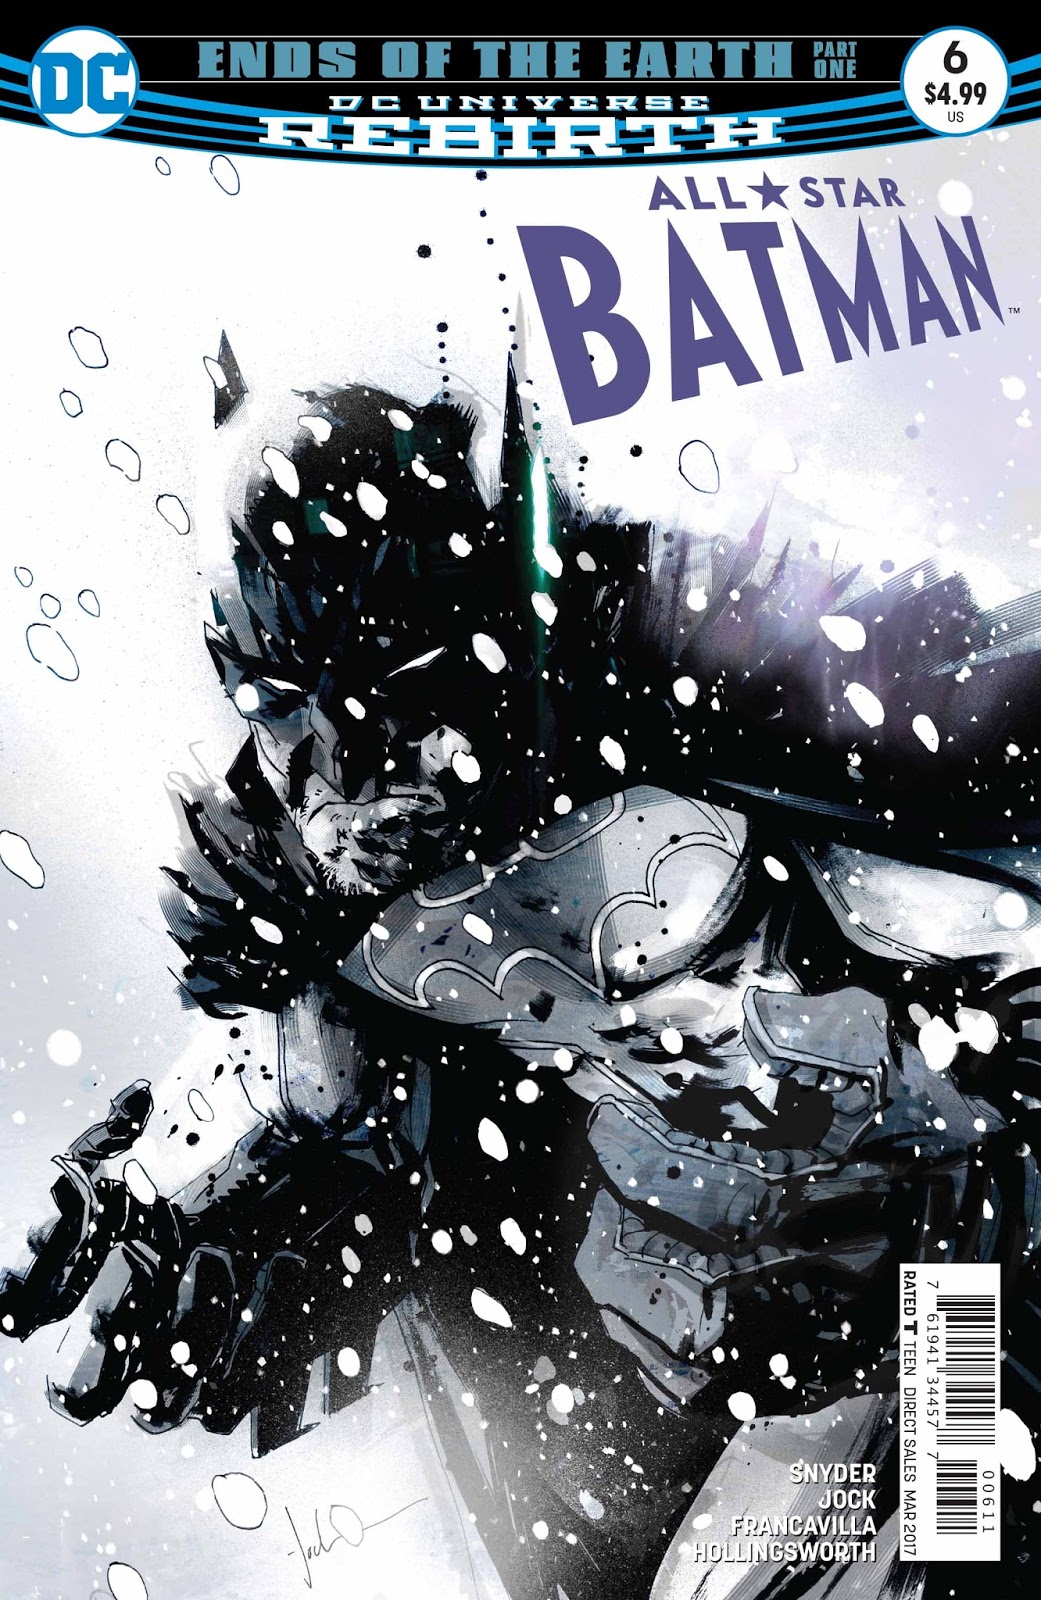 Weird Science DC Comics: All-Star Batman #6 Review and *SPOILERS*